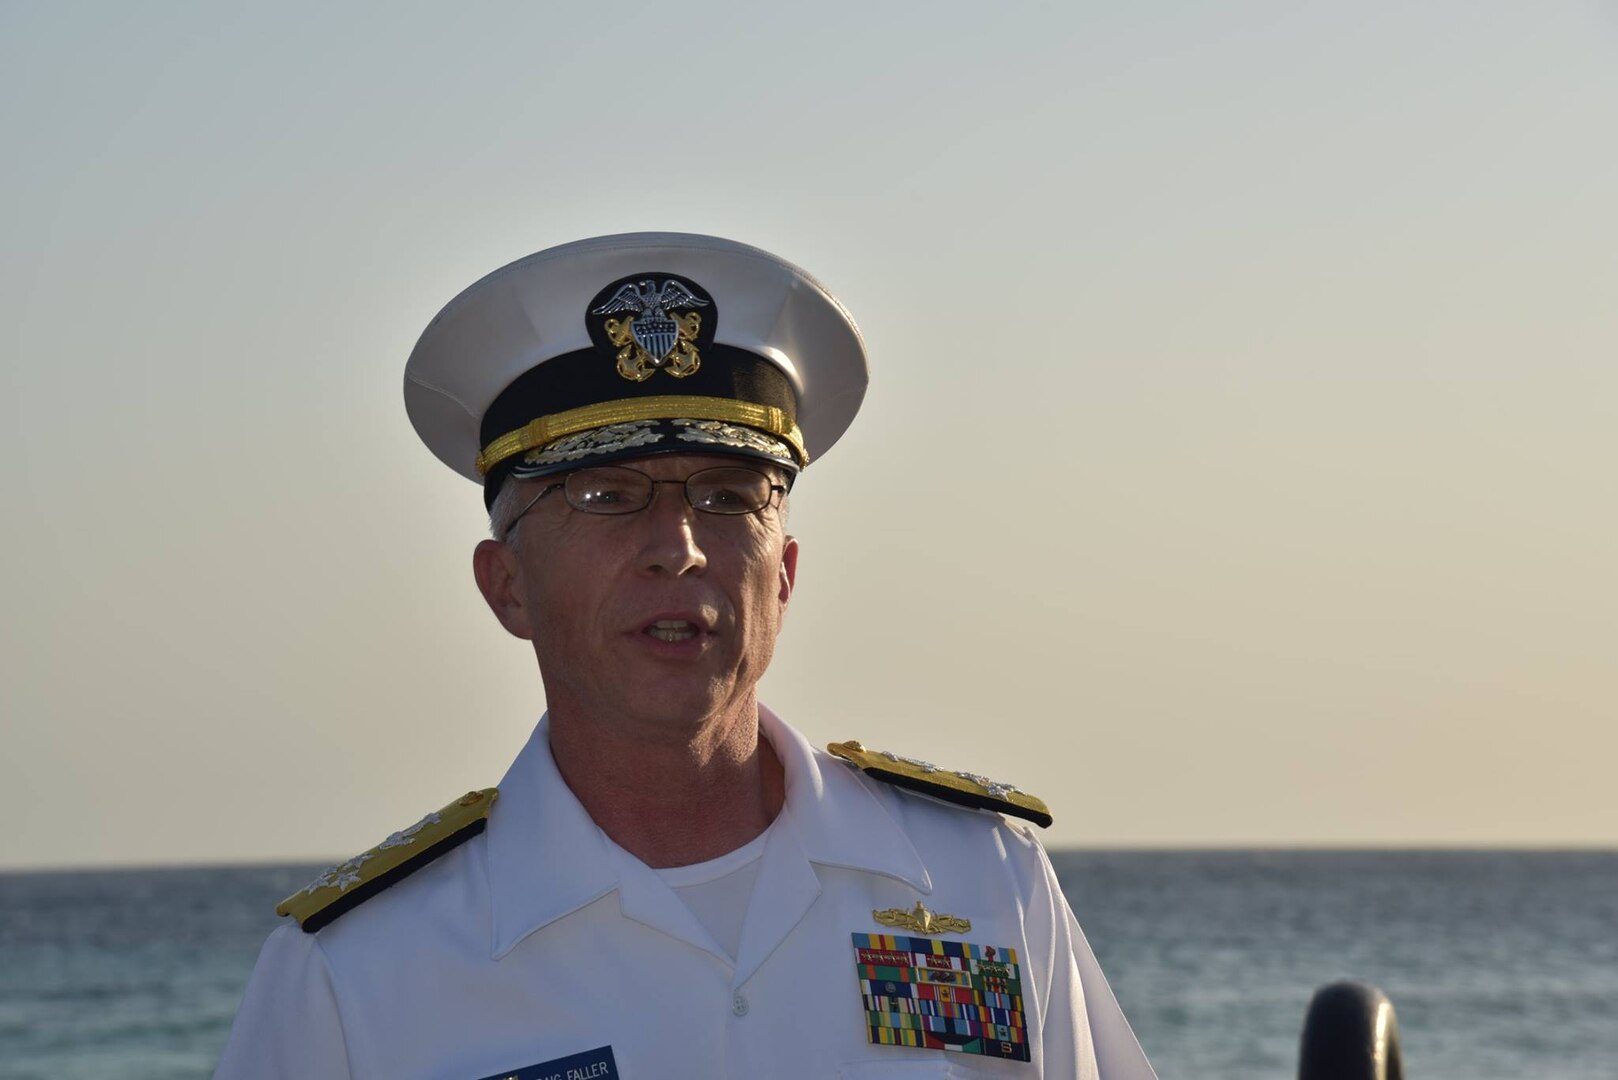 U.S. Southern Command's commander, Adm. Craig Faller, attends the unveiling of the USS Erie Memorial plaque at Koredor in Curaçao in honor of those who made the ultimate sacrifice.